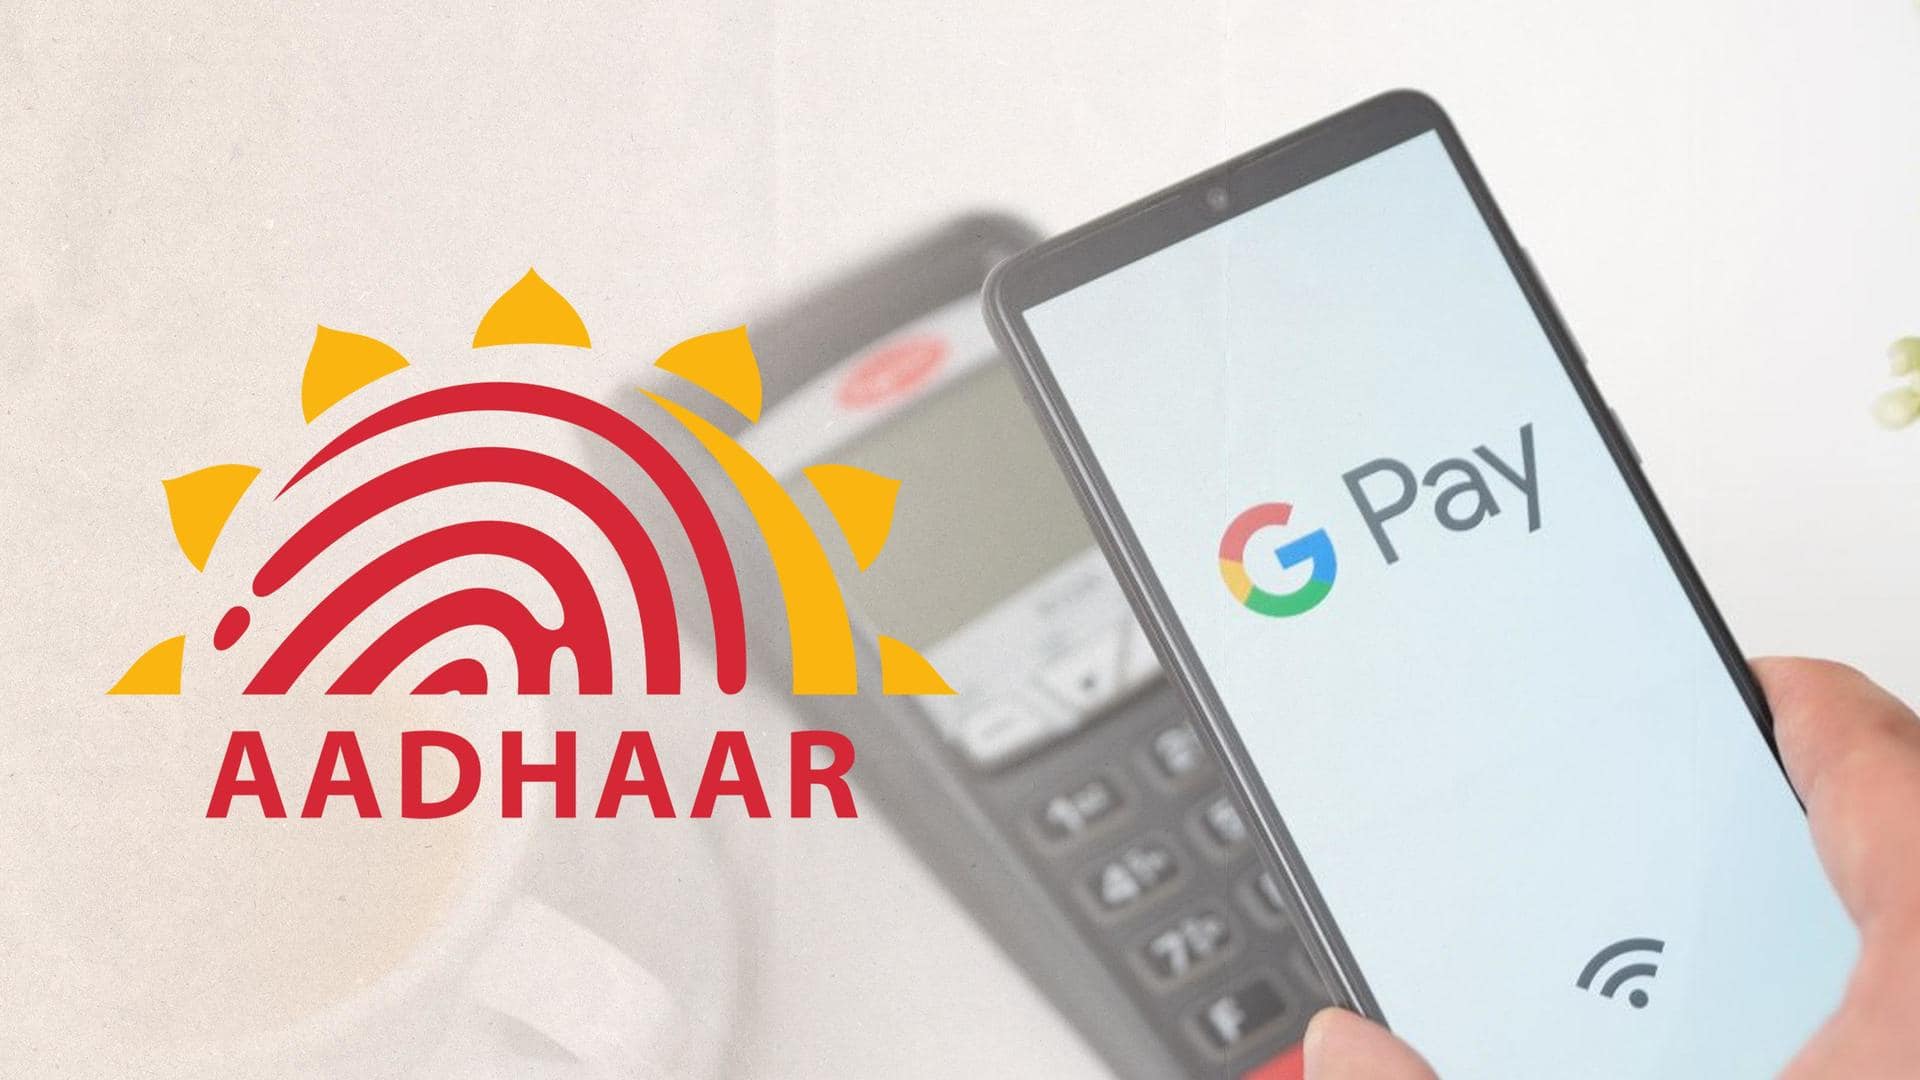 Google Pay now allows Aadhaar-based verification for UPI activation